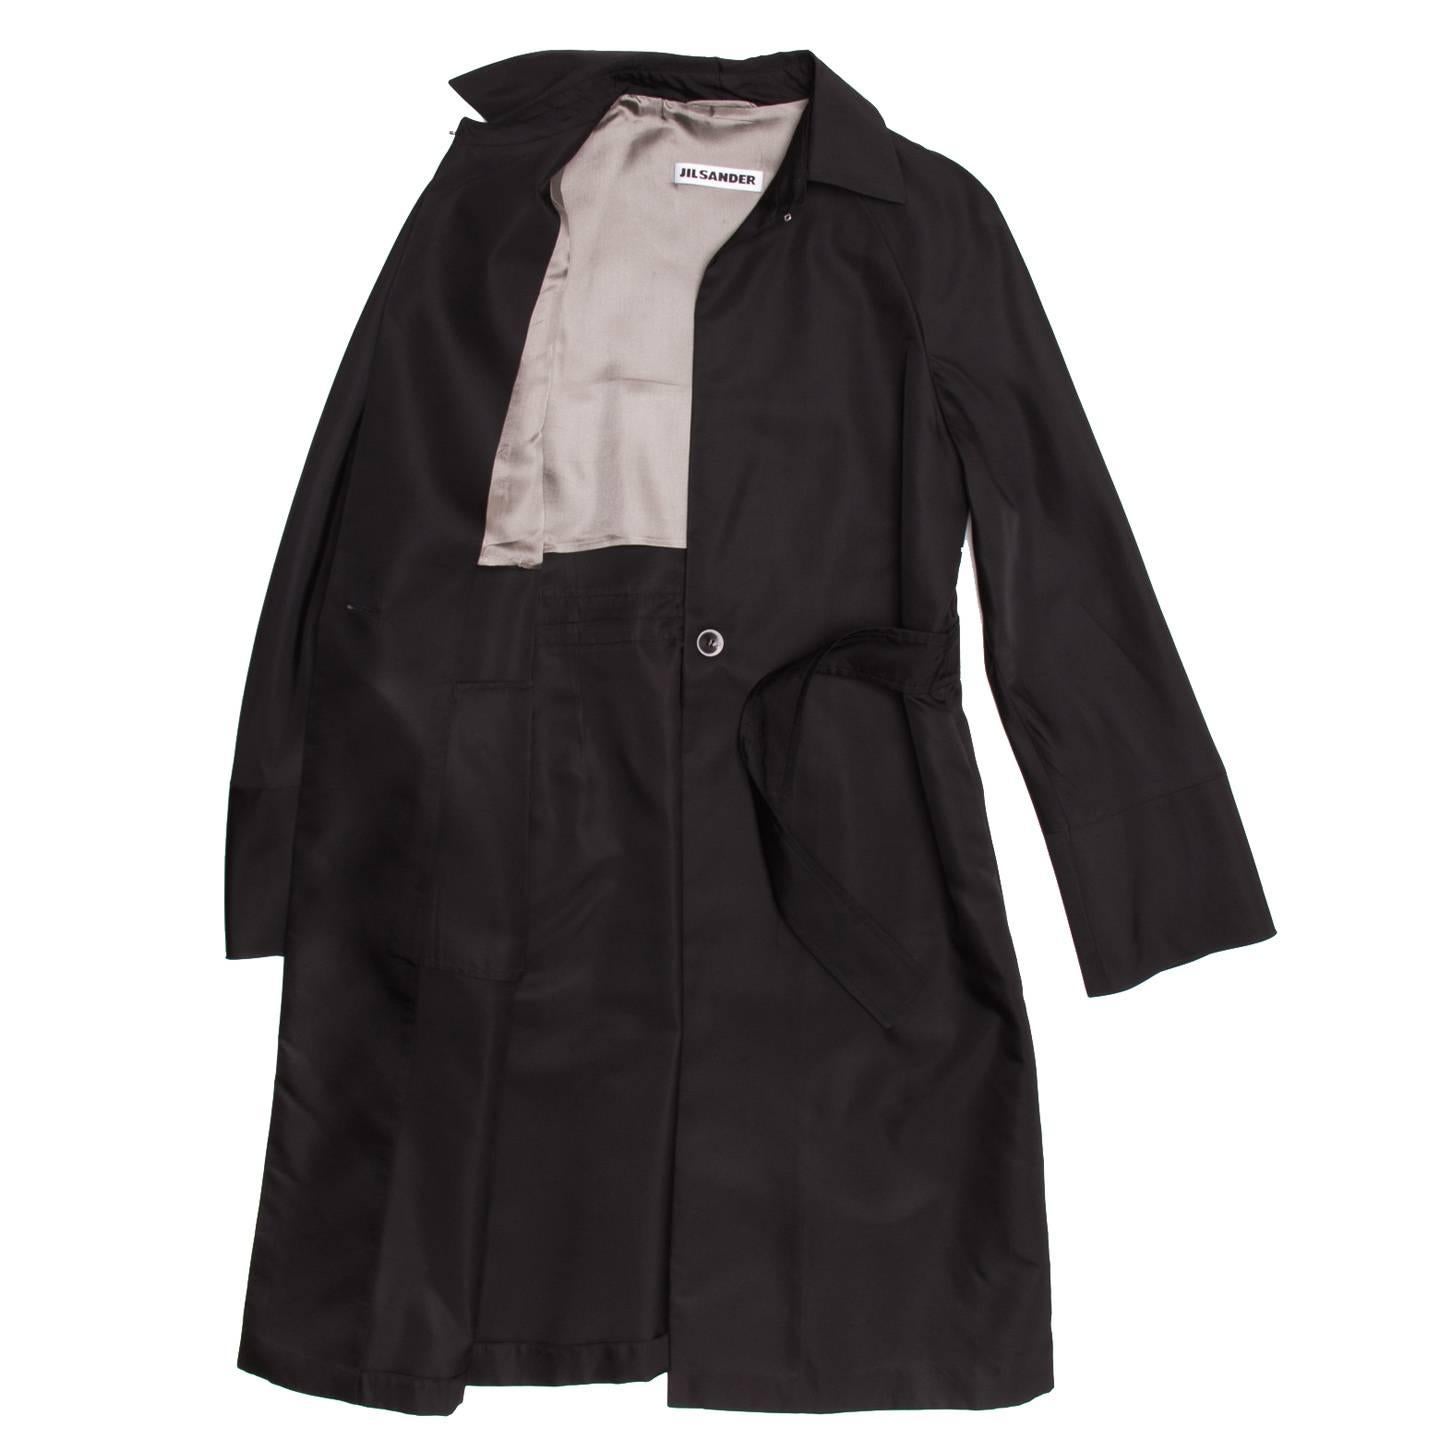 Jil Sander Black Silk Belted Coat In Excellent Condition For Sale In Brooklyn, NY